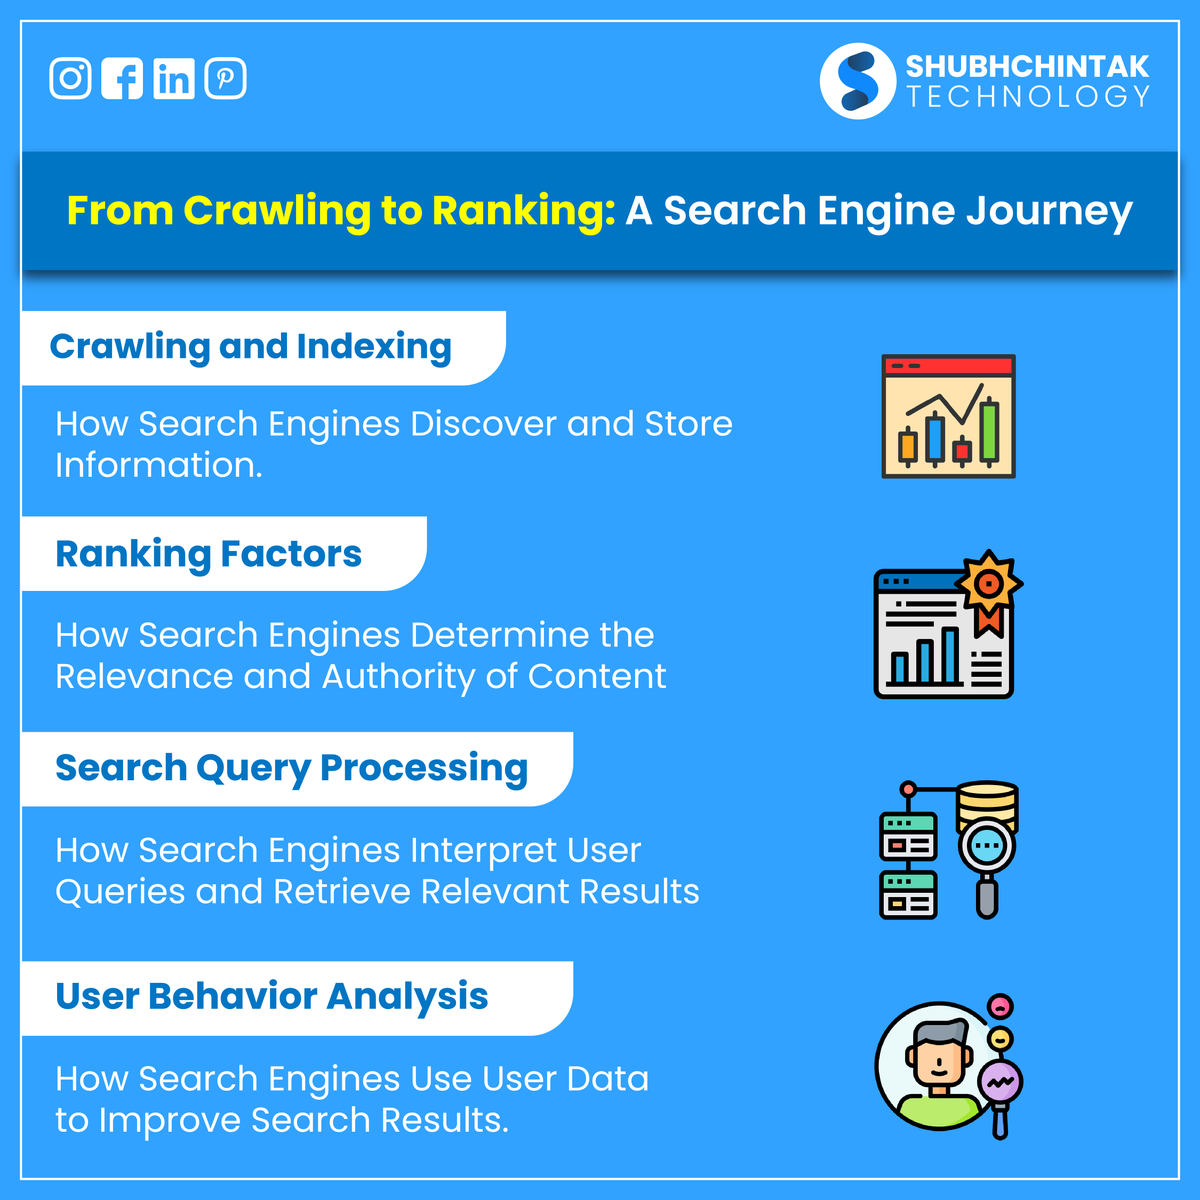 The search engine journey is a quest for the coveted top spot, where ranking reigns supreme. 🚀 #searchengine #googlesearchengine #crawling #ranking #googleranking #SEO #Digitalmarketing #Shubhchintak #webagency #digitalmarketingagency